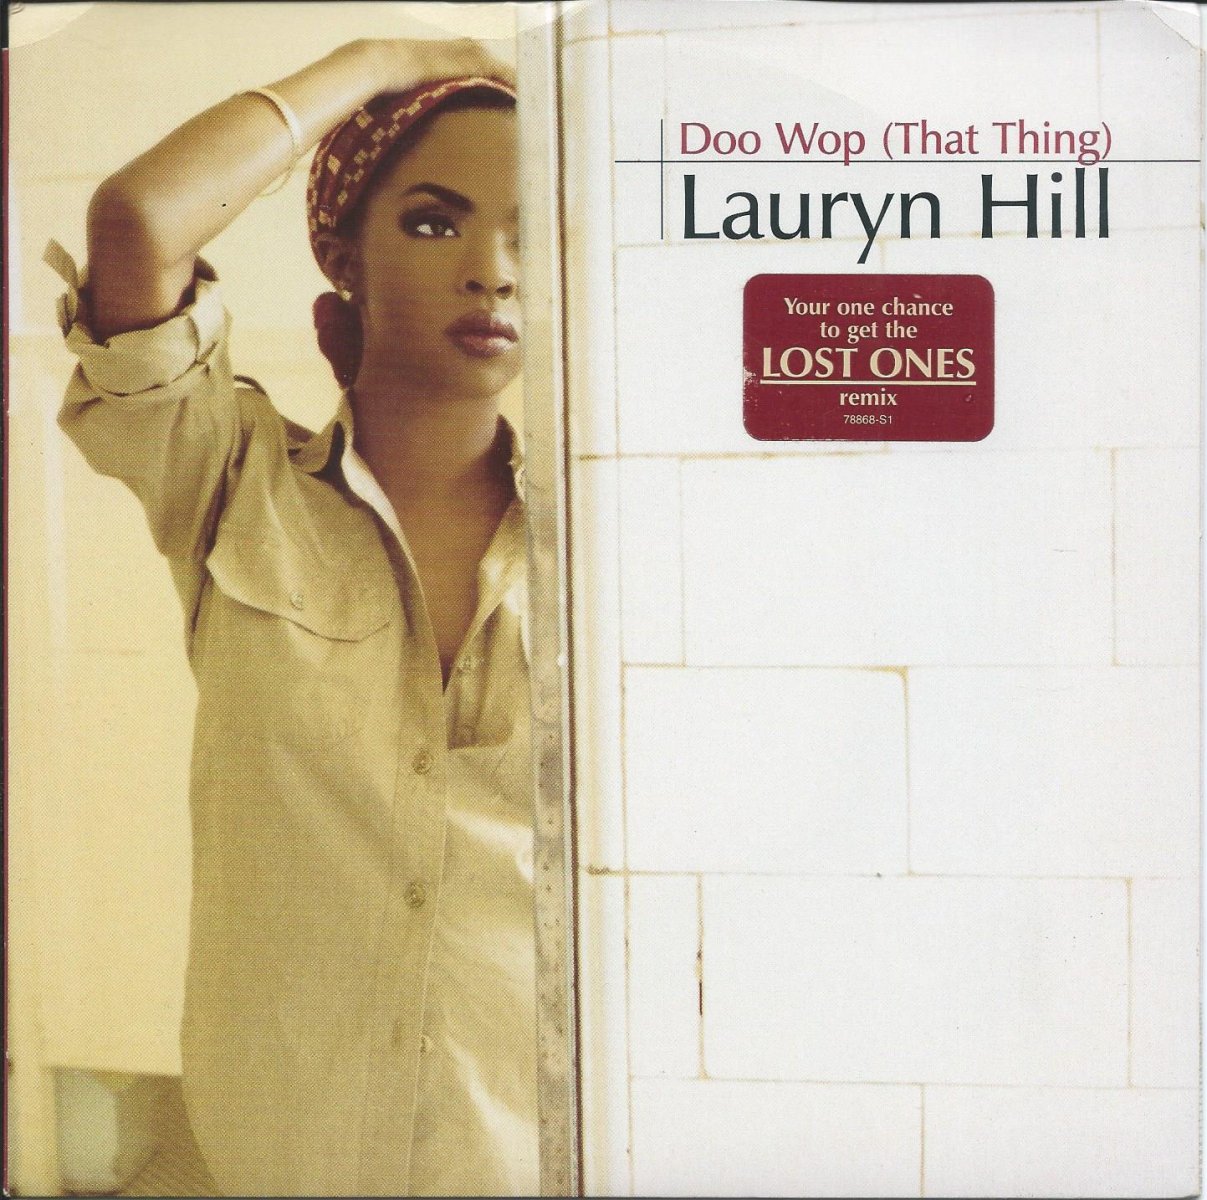 LAURYN HILL / DOO WOP (THAT THING) / LOST ONES (REMIX) (7